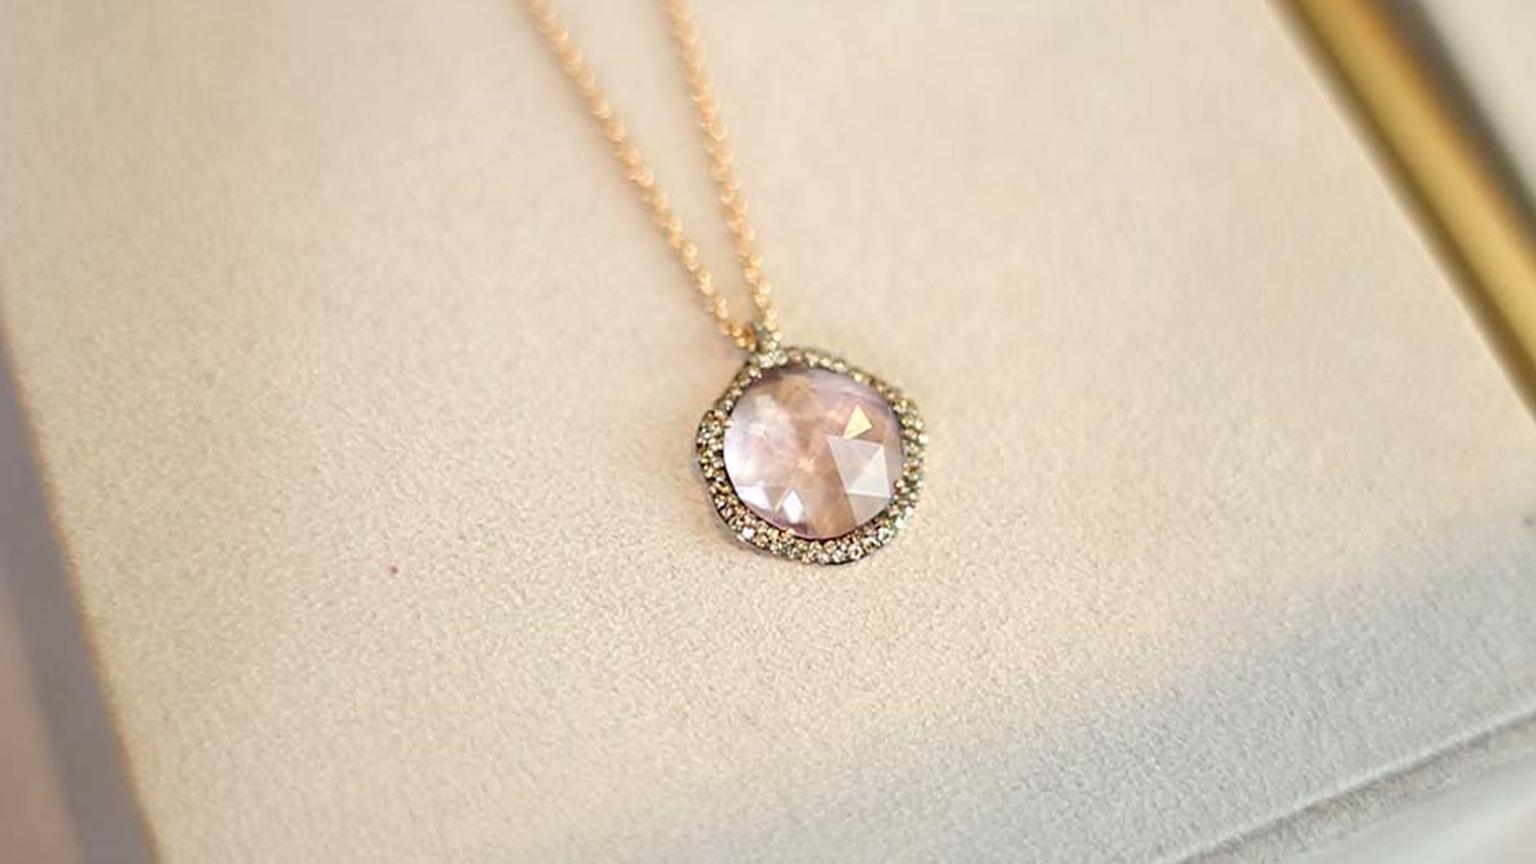 Astley Clarke Fao collection necklace with a morganite encircled by pavé diamonds.